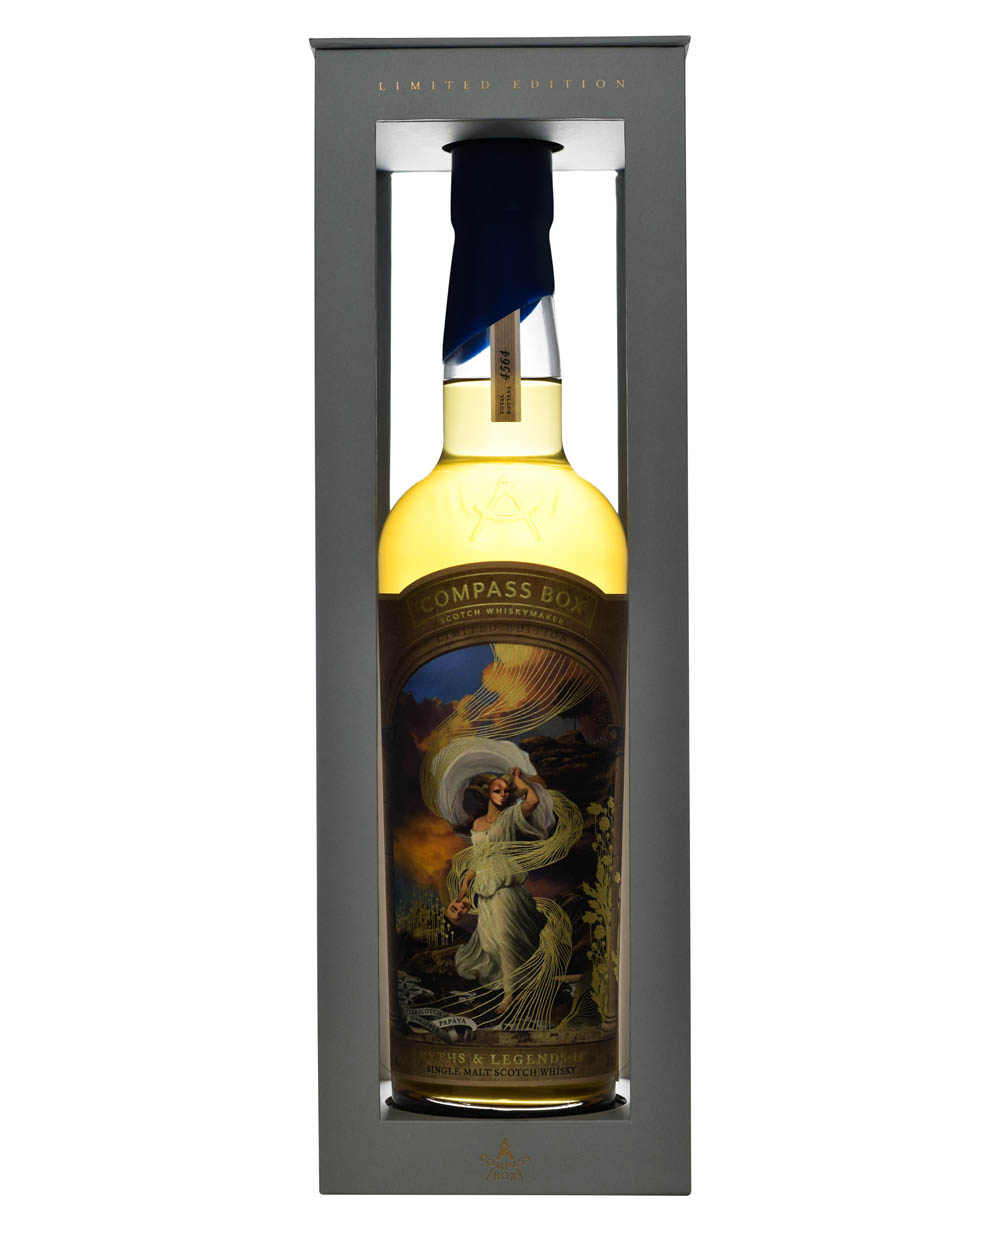 Compass BCompass Box Myths & Legends II Box Musthave Malts MHM